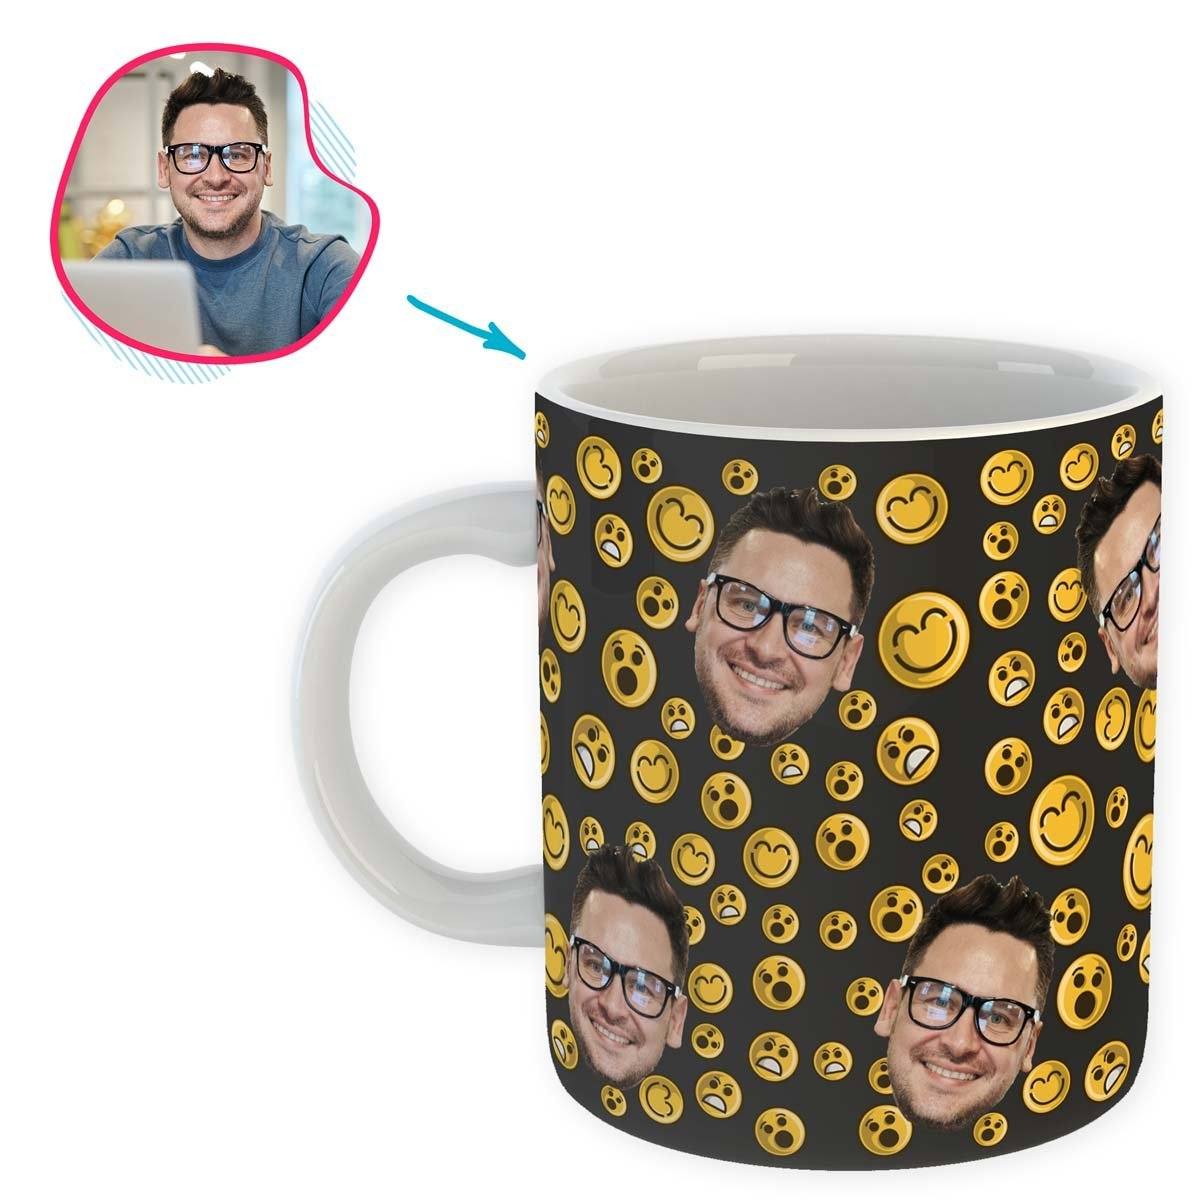 dark Smiles mug personalized with photo of face printed on it